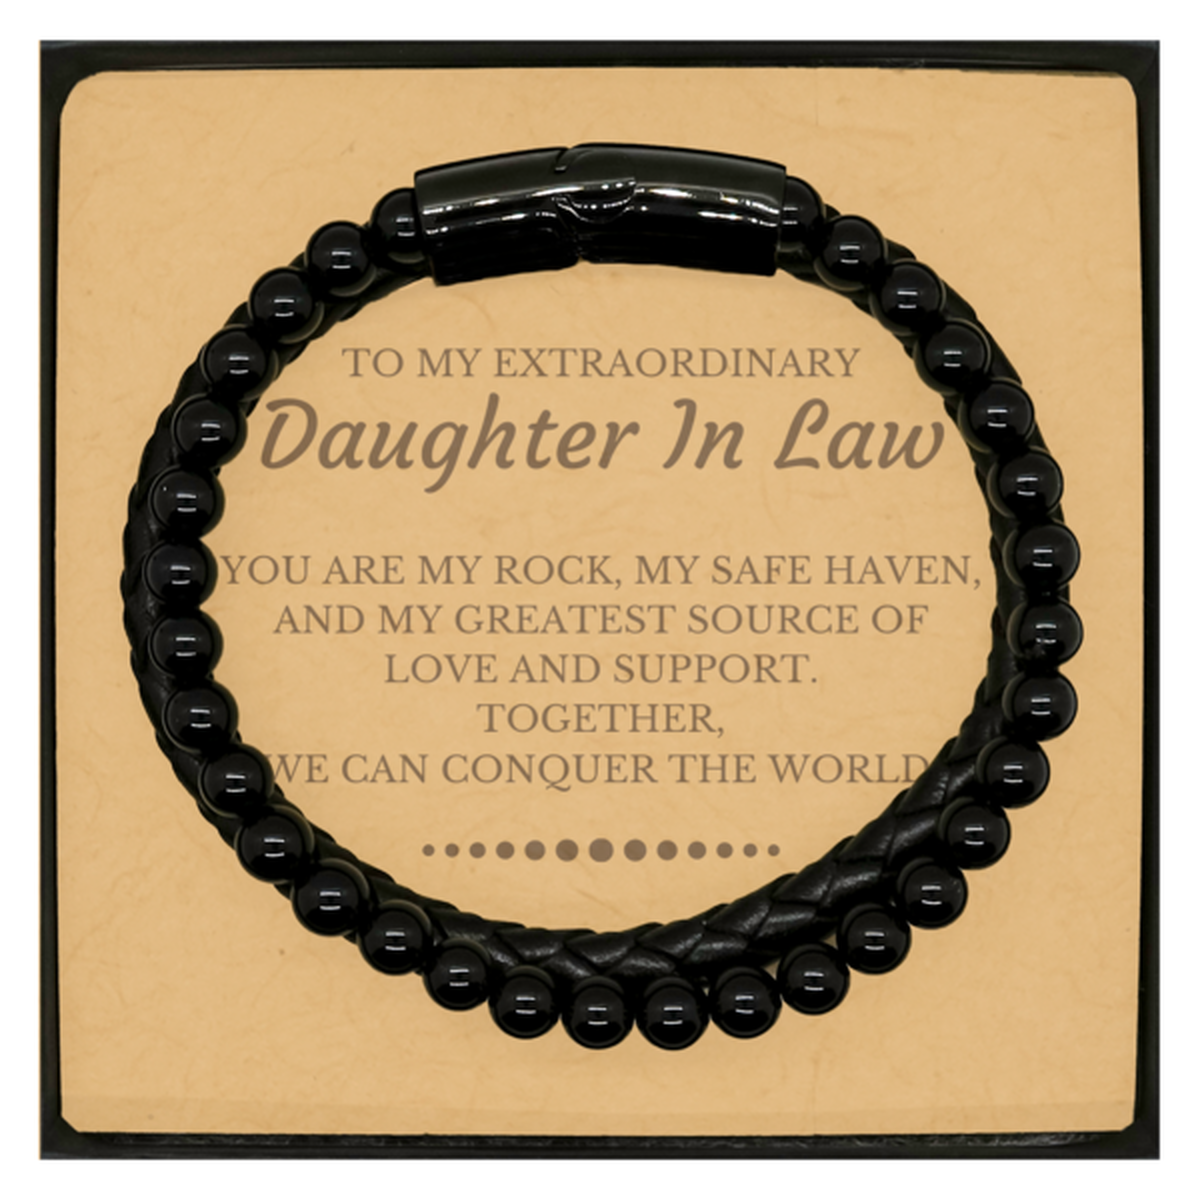 To My Extraordinary Daughter In Law Gifts, Together, we can conquer the world, Birthday Christmas Stone Leather Bracelets For Daughter In Law, Christmas Gifts For Daughter In Law